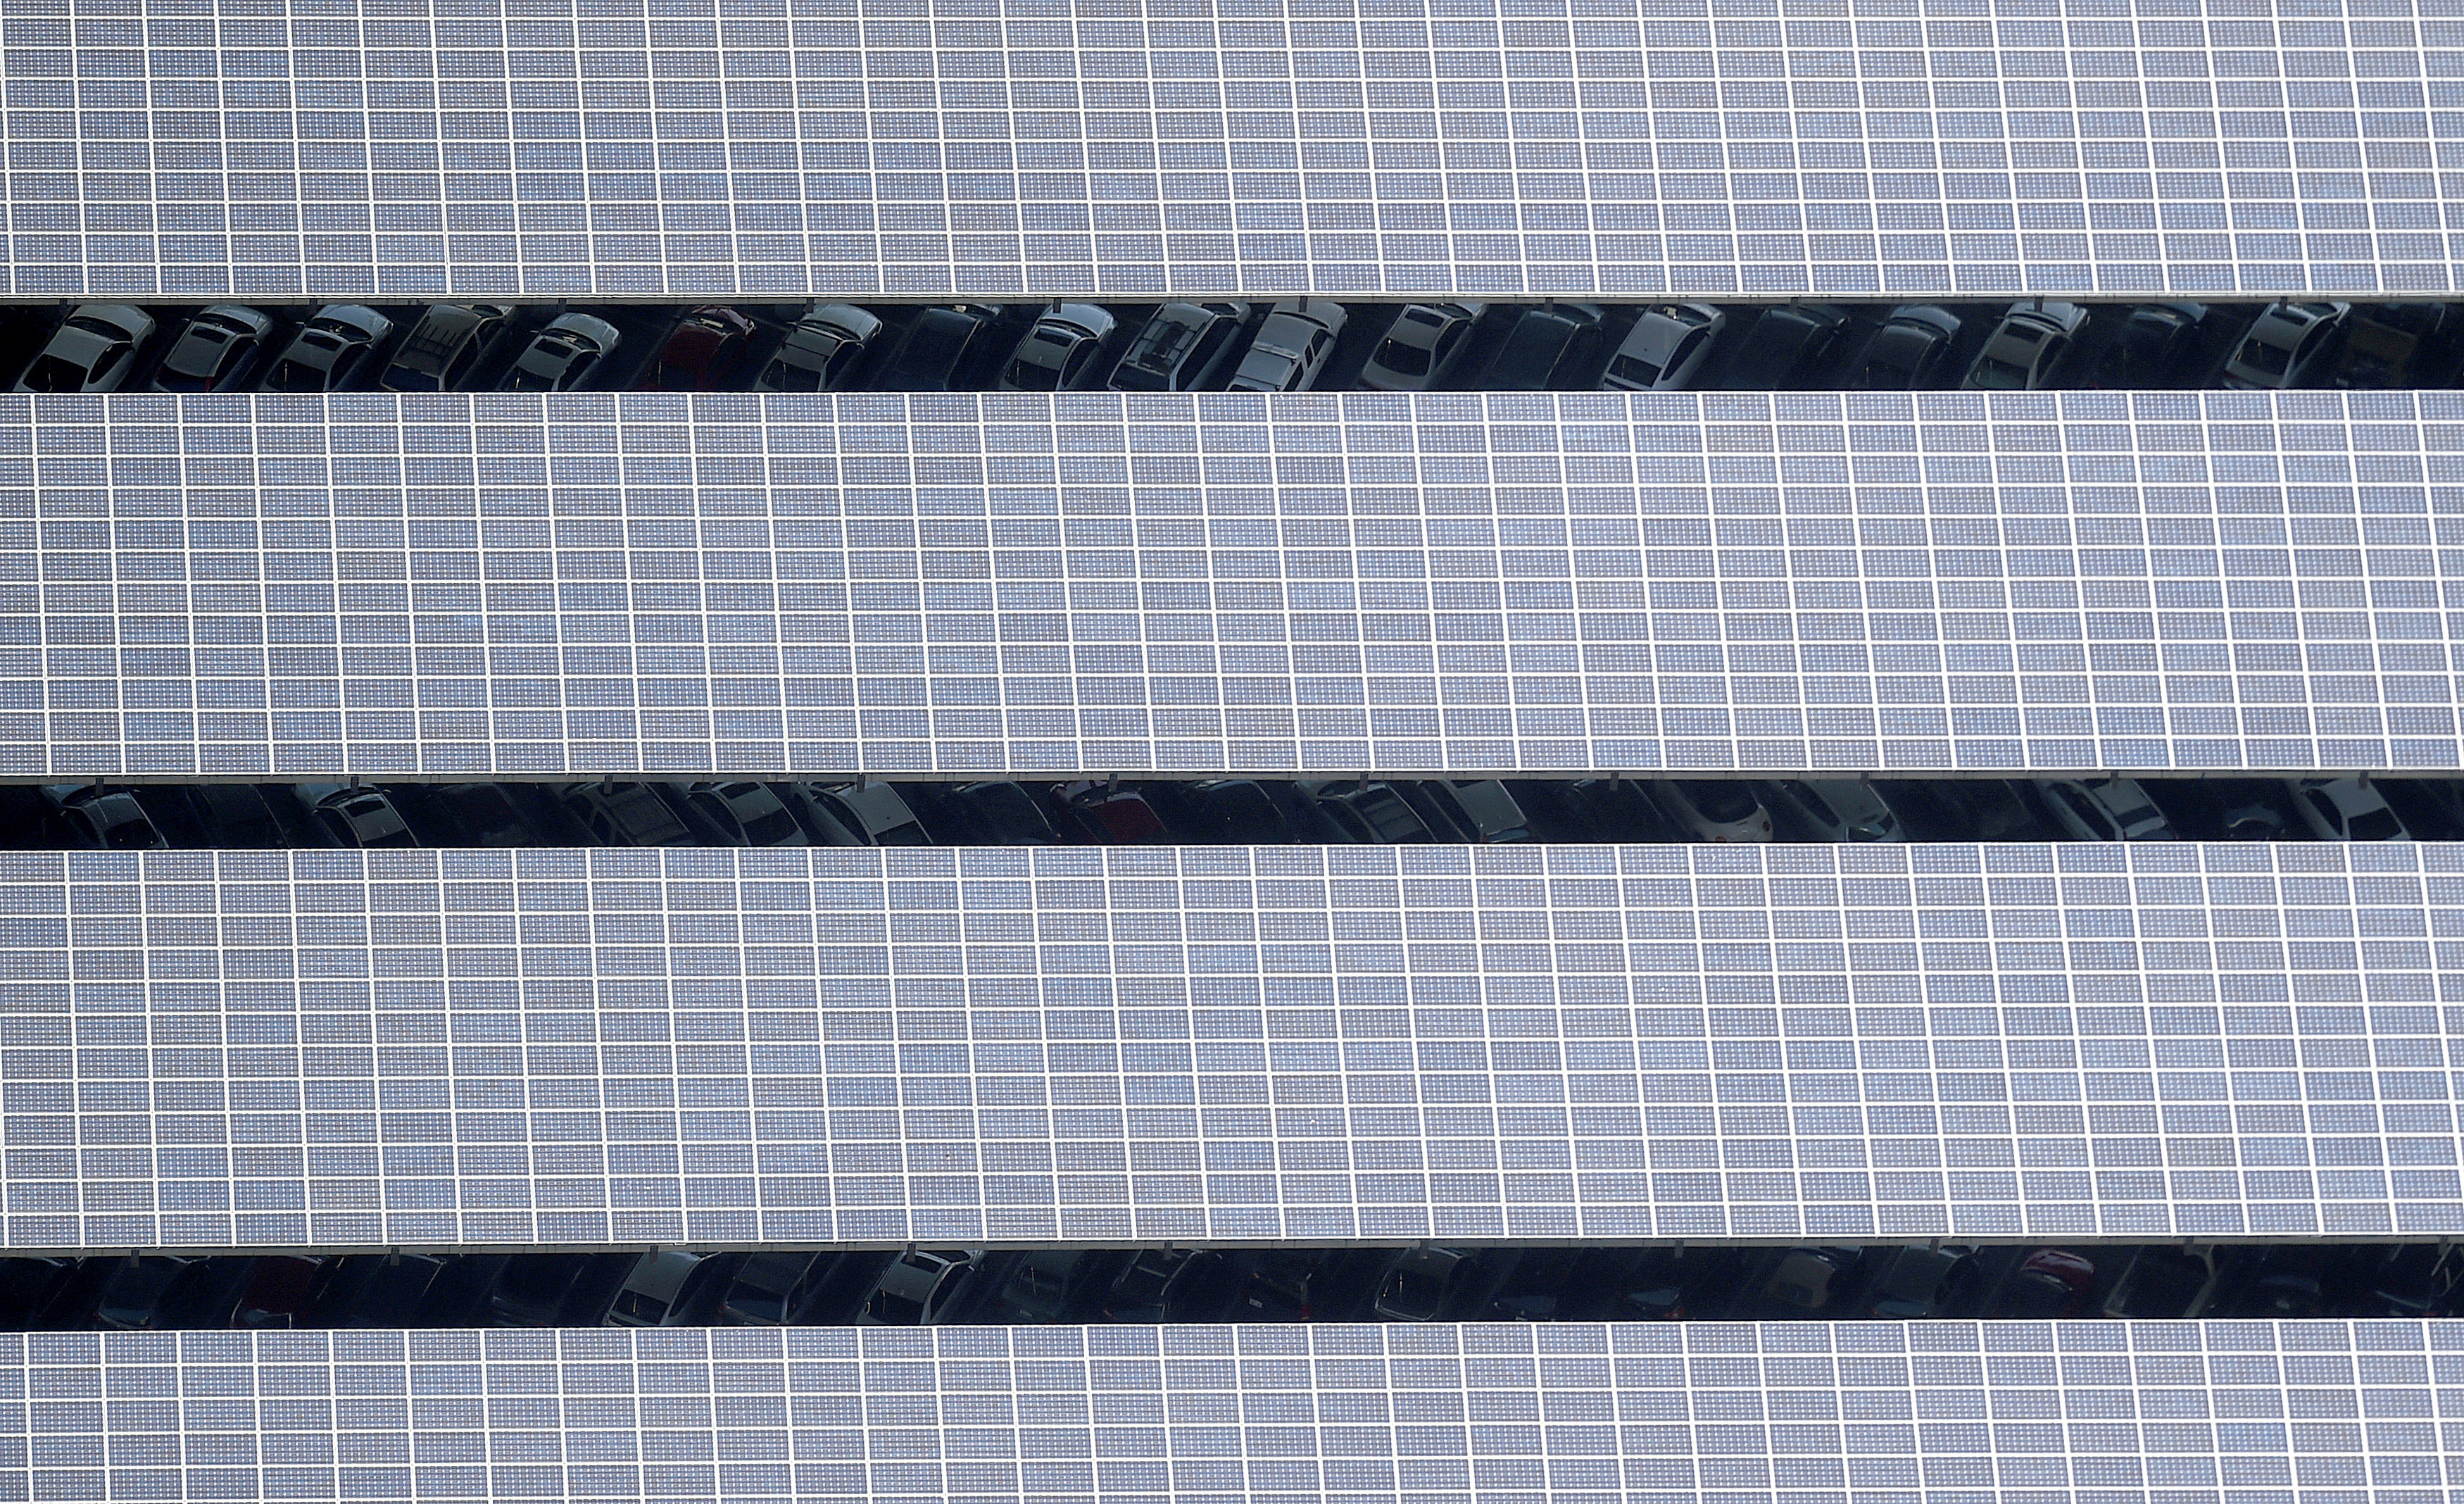 Solar panels are seen on the roof of a car park in Mountain View